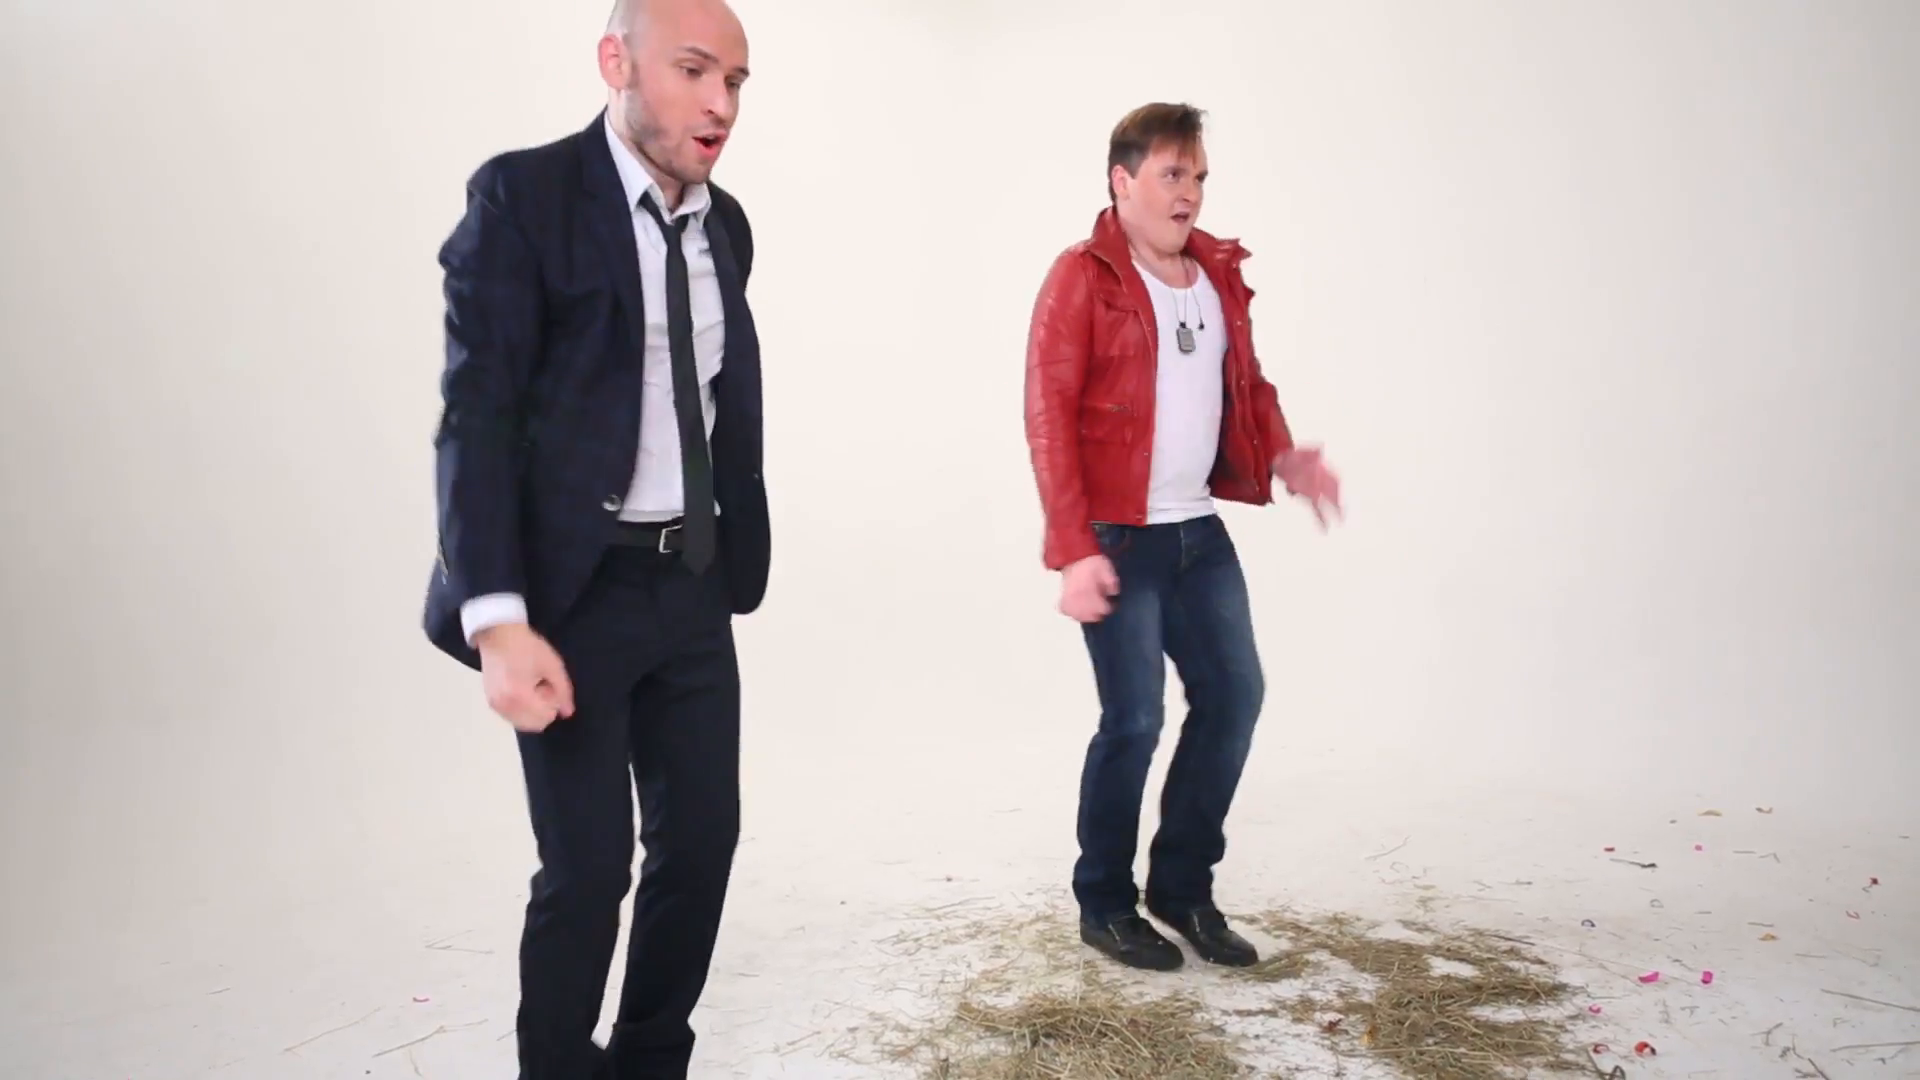 Man in suit and man in red jacket dance on floor with hay in white ...